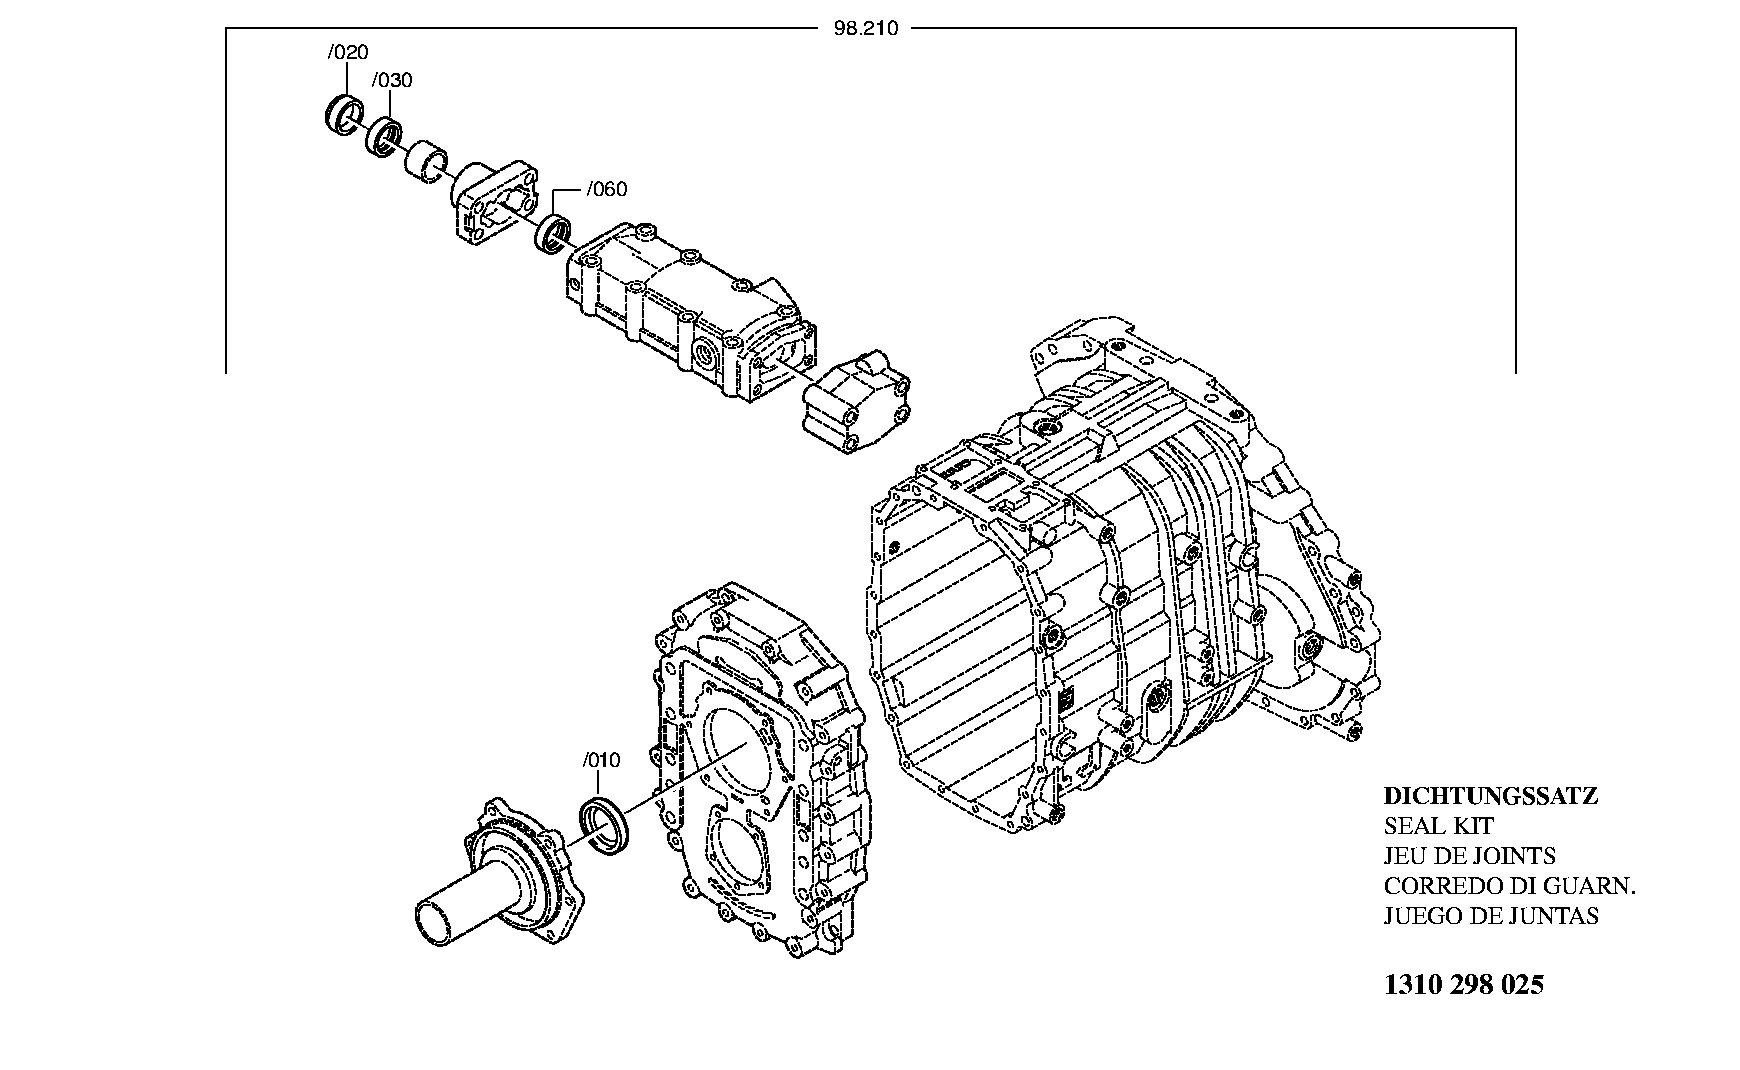 drawing for DAF 1833792 - SEAL KIT (figure 5)